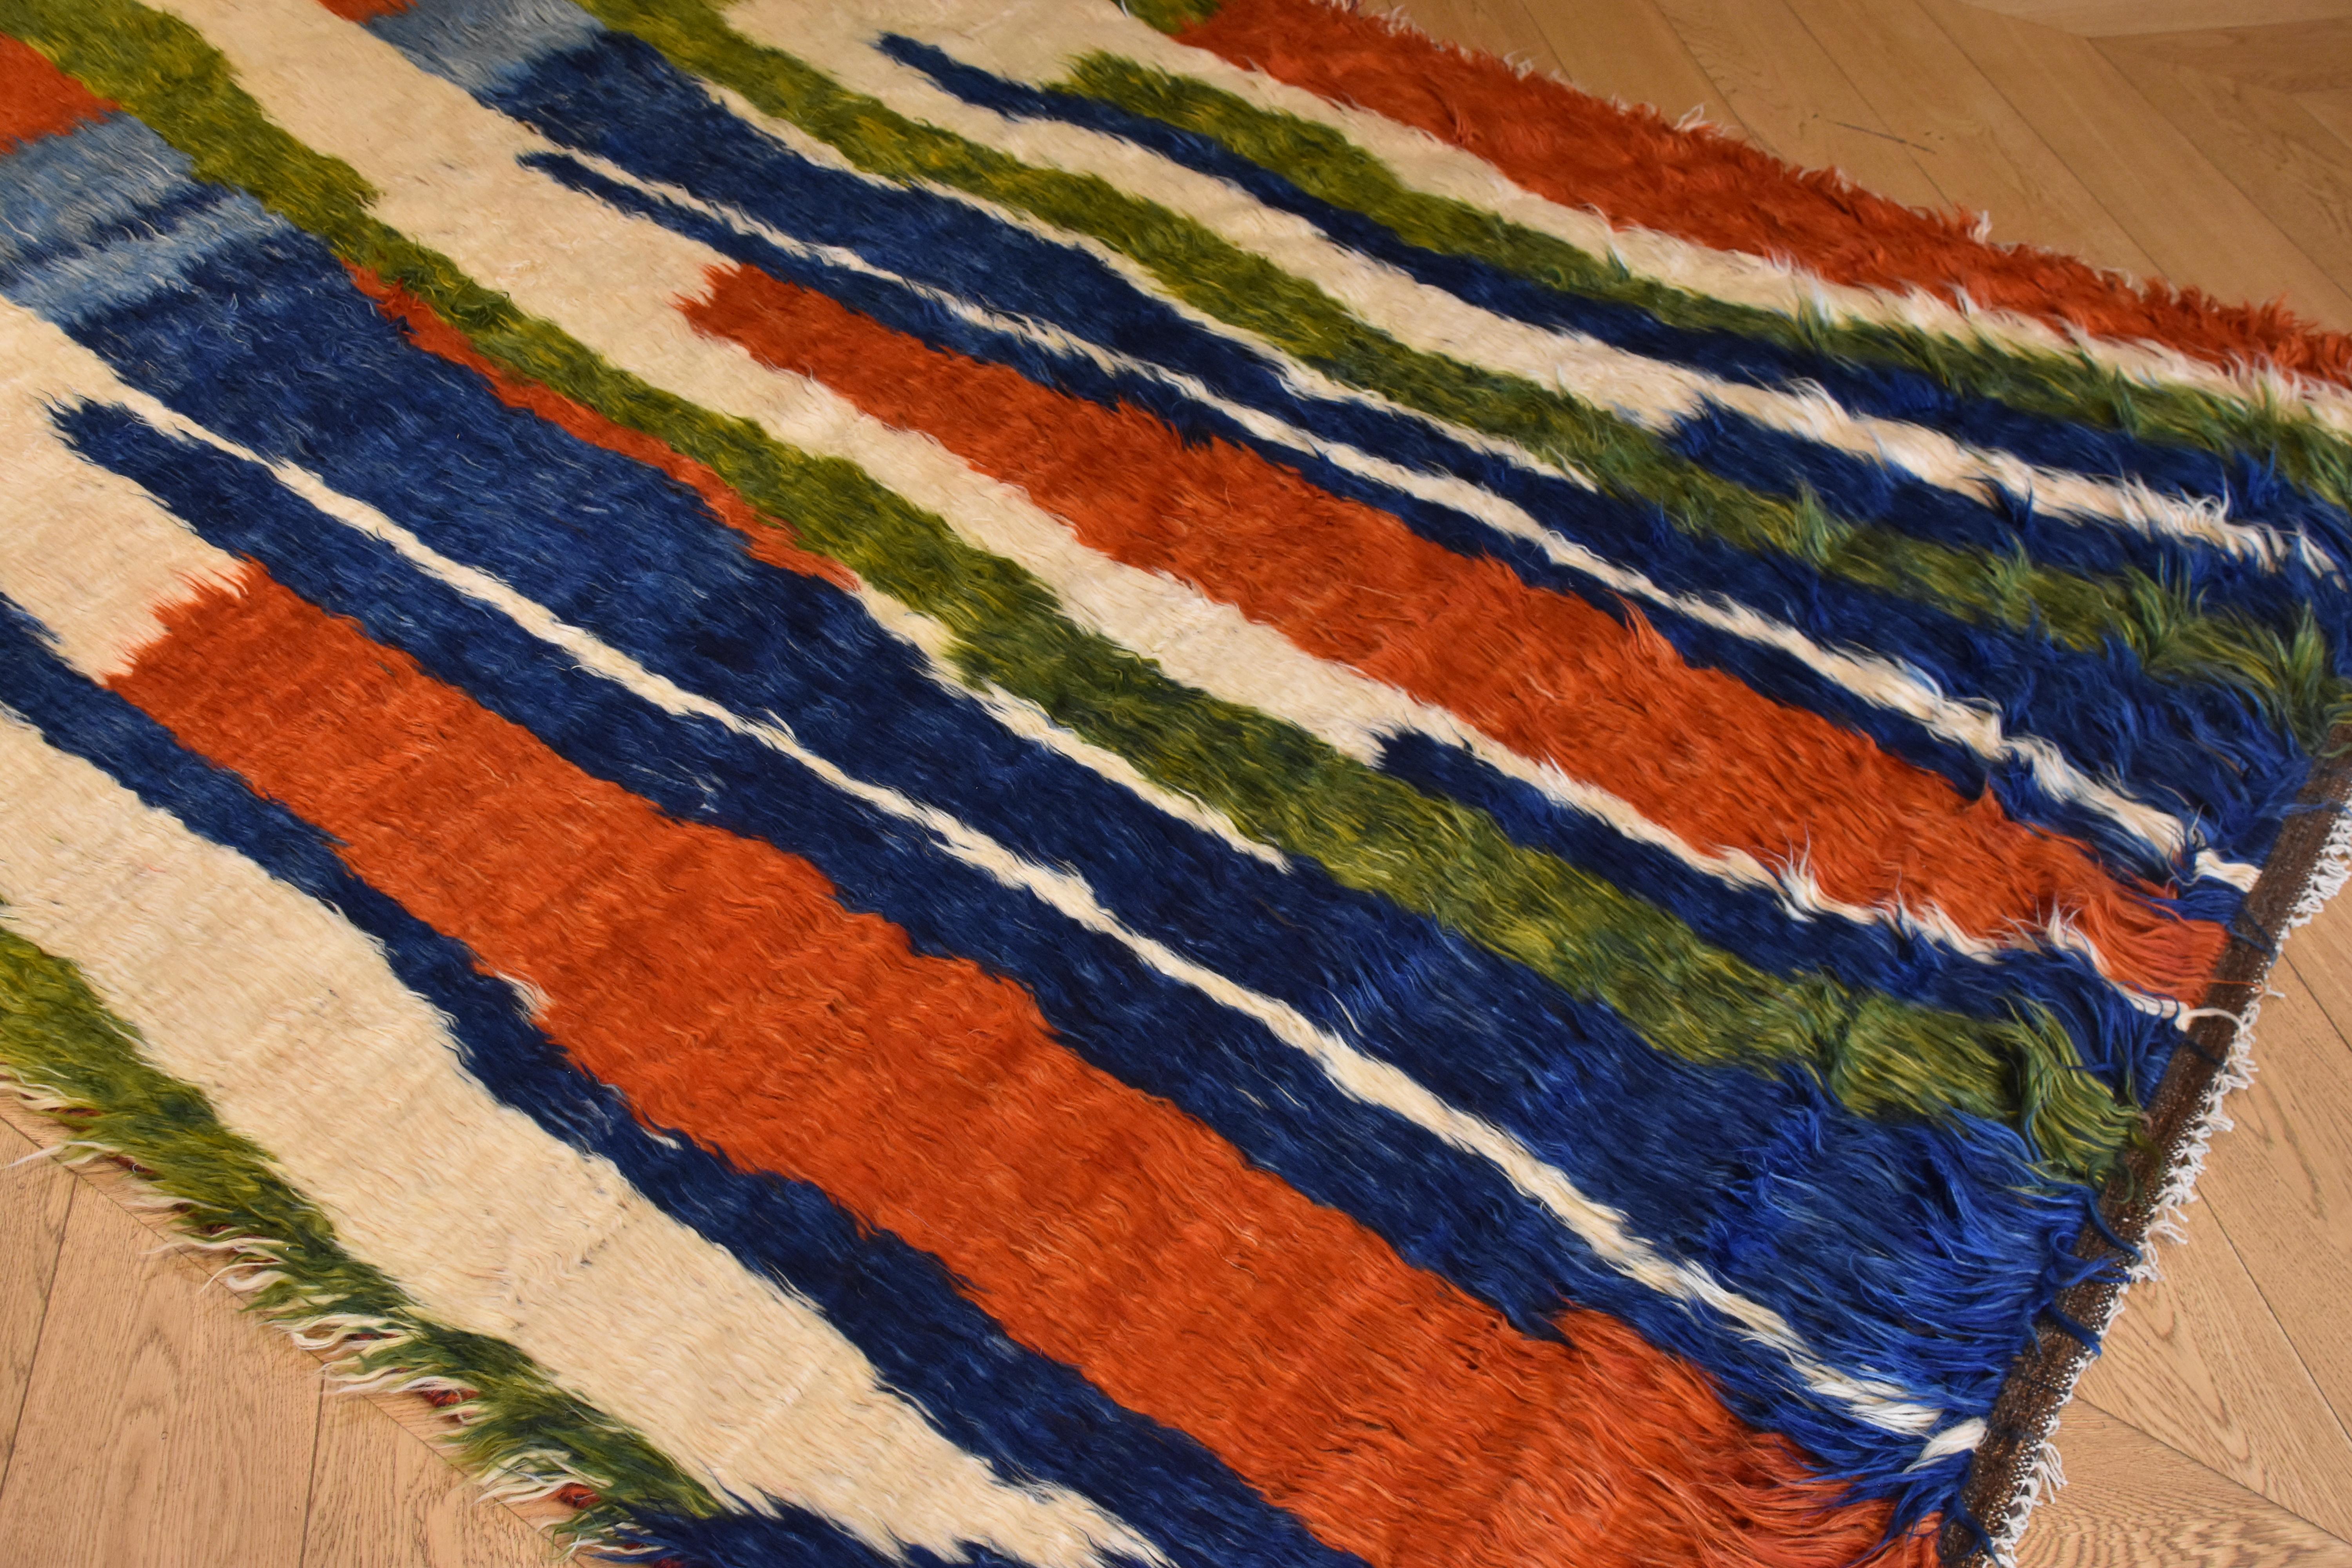 Contemporary 21st Century Green Blue Red and White Nomadic Afghan Rug, circa 2010s